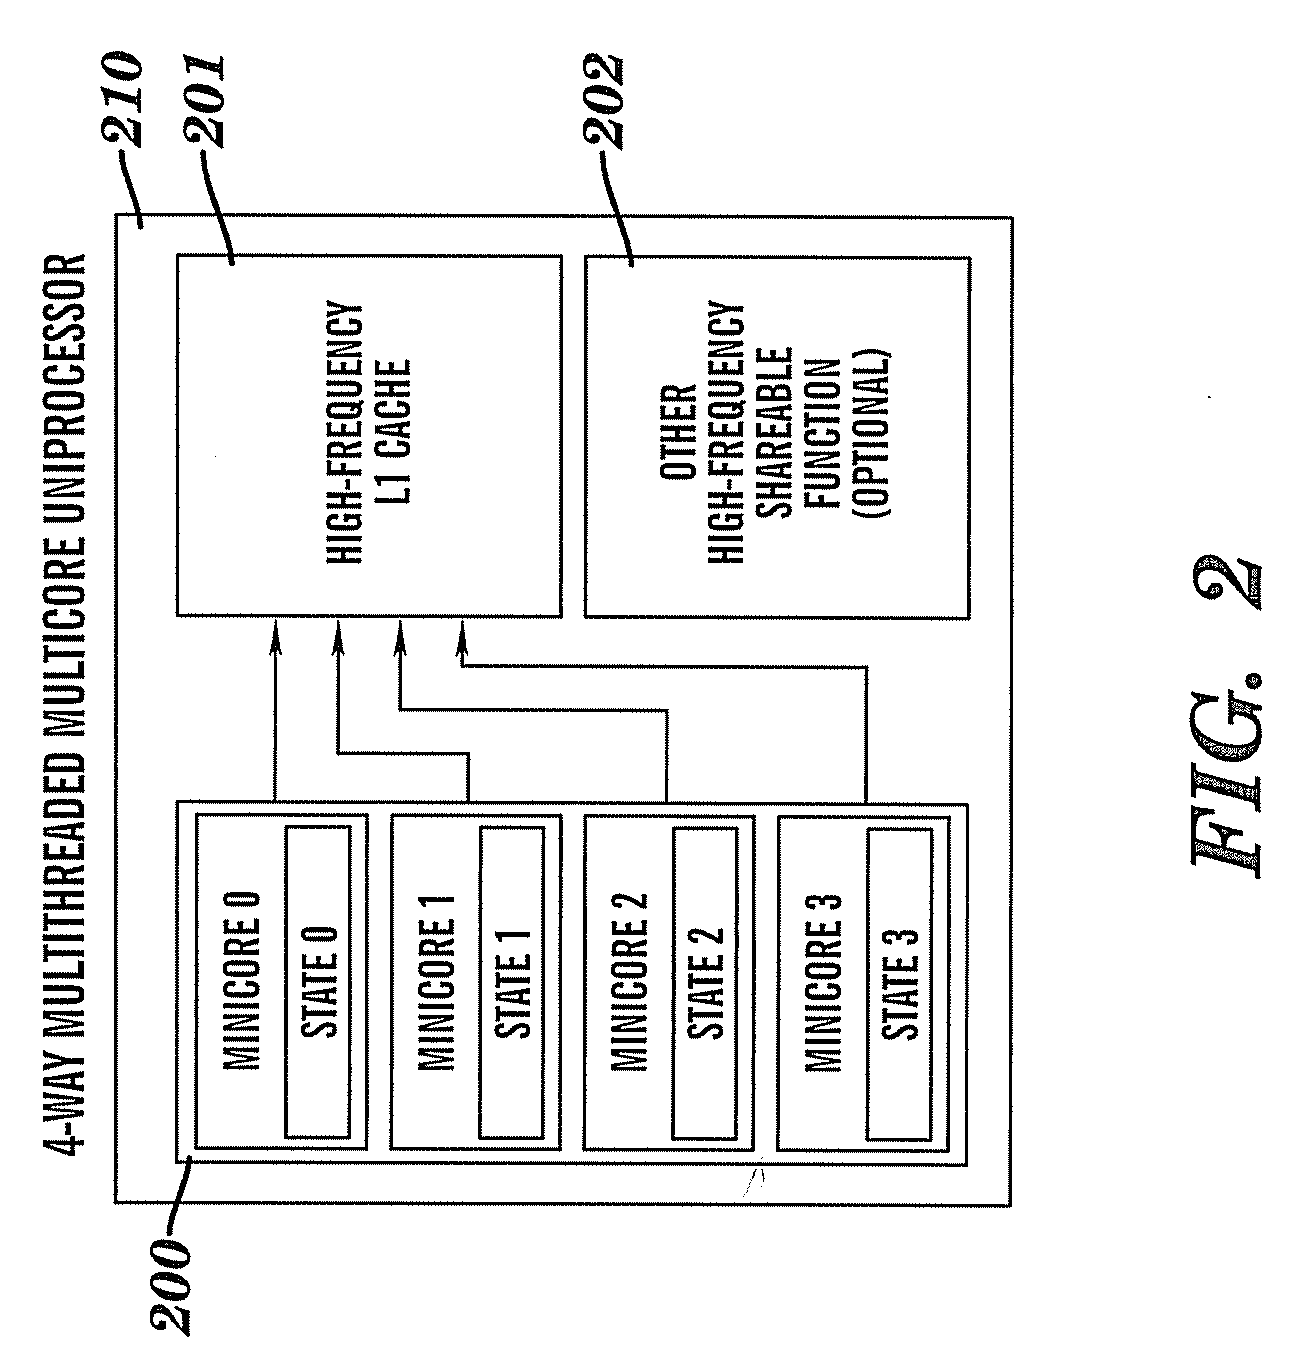 Multithreaded multicore uniprocessor and a heterogeneous multiprocessor incorporating the same